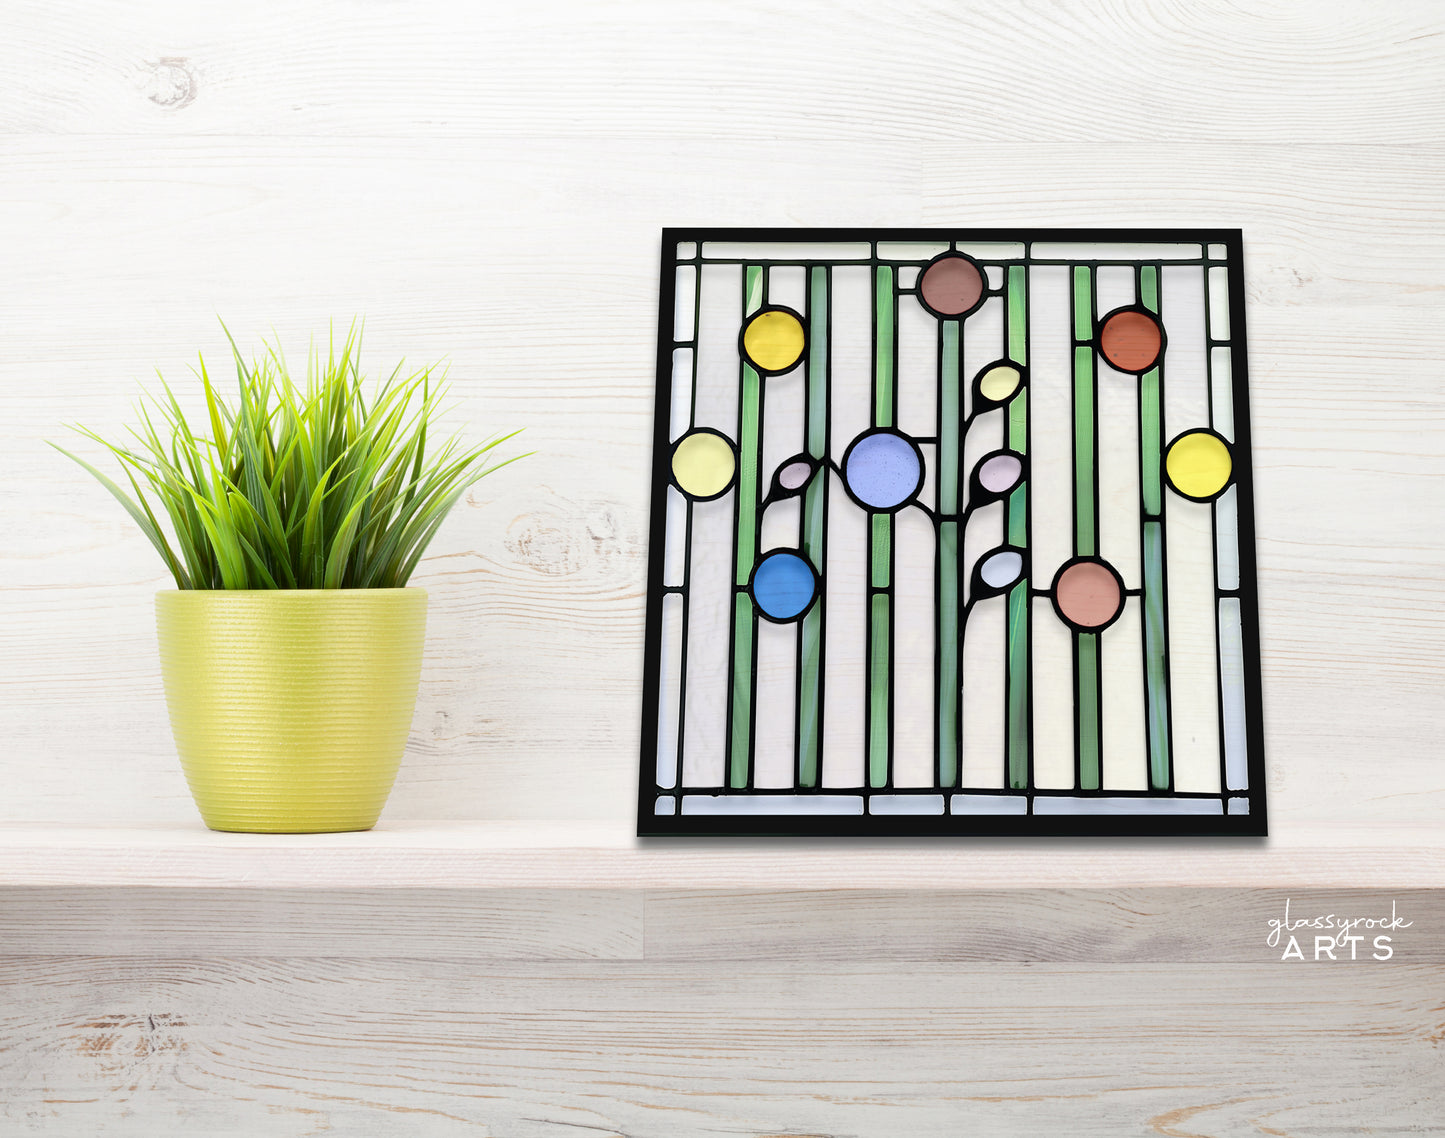 Abstract Garden Stained Glass Flowers Pattern